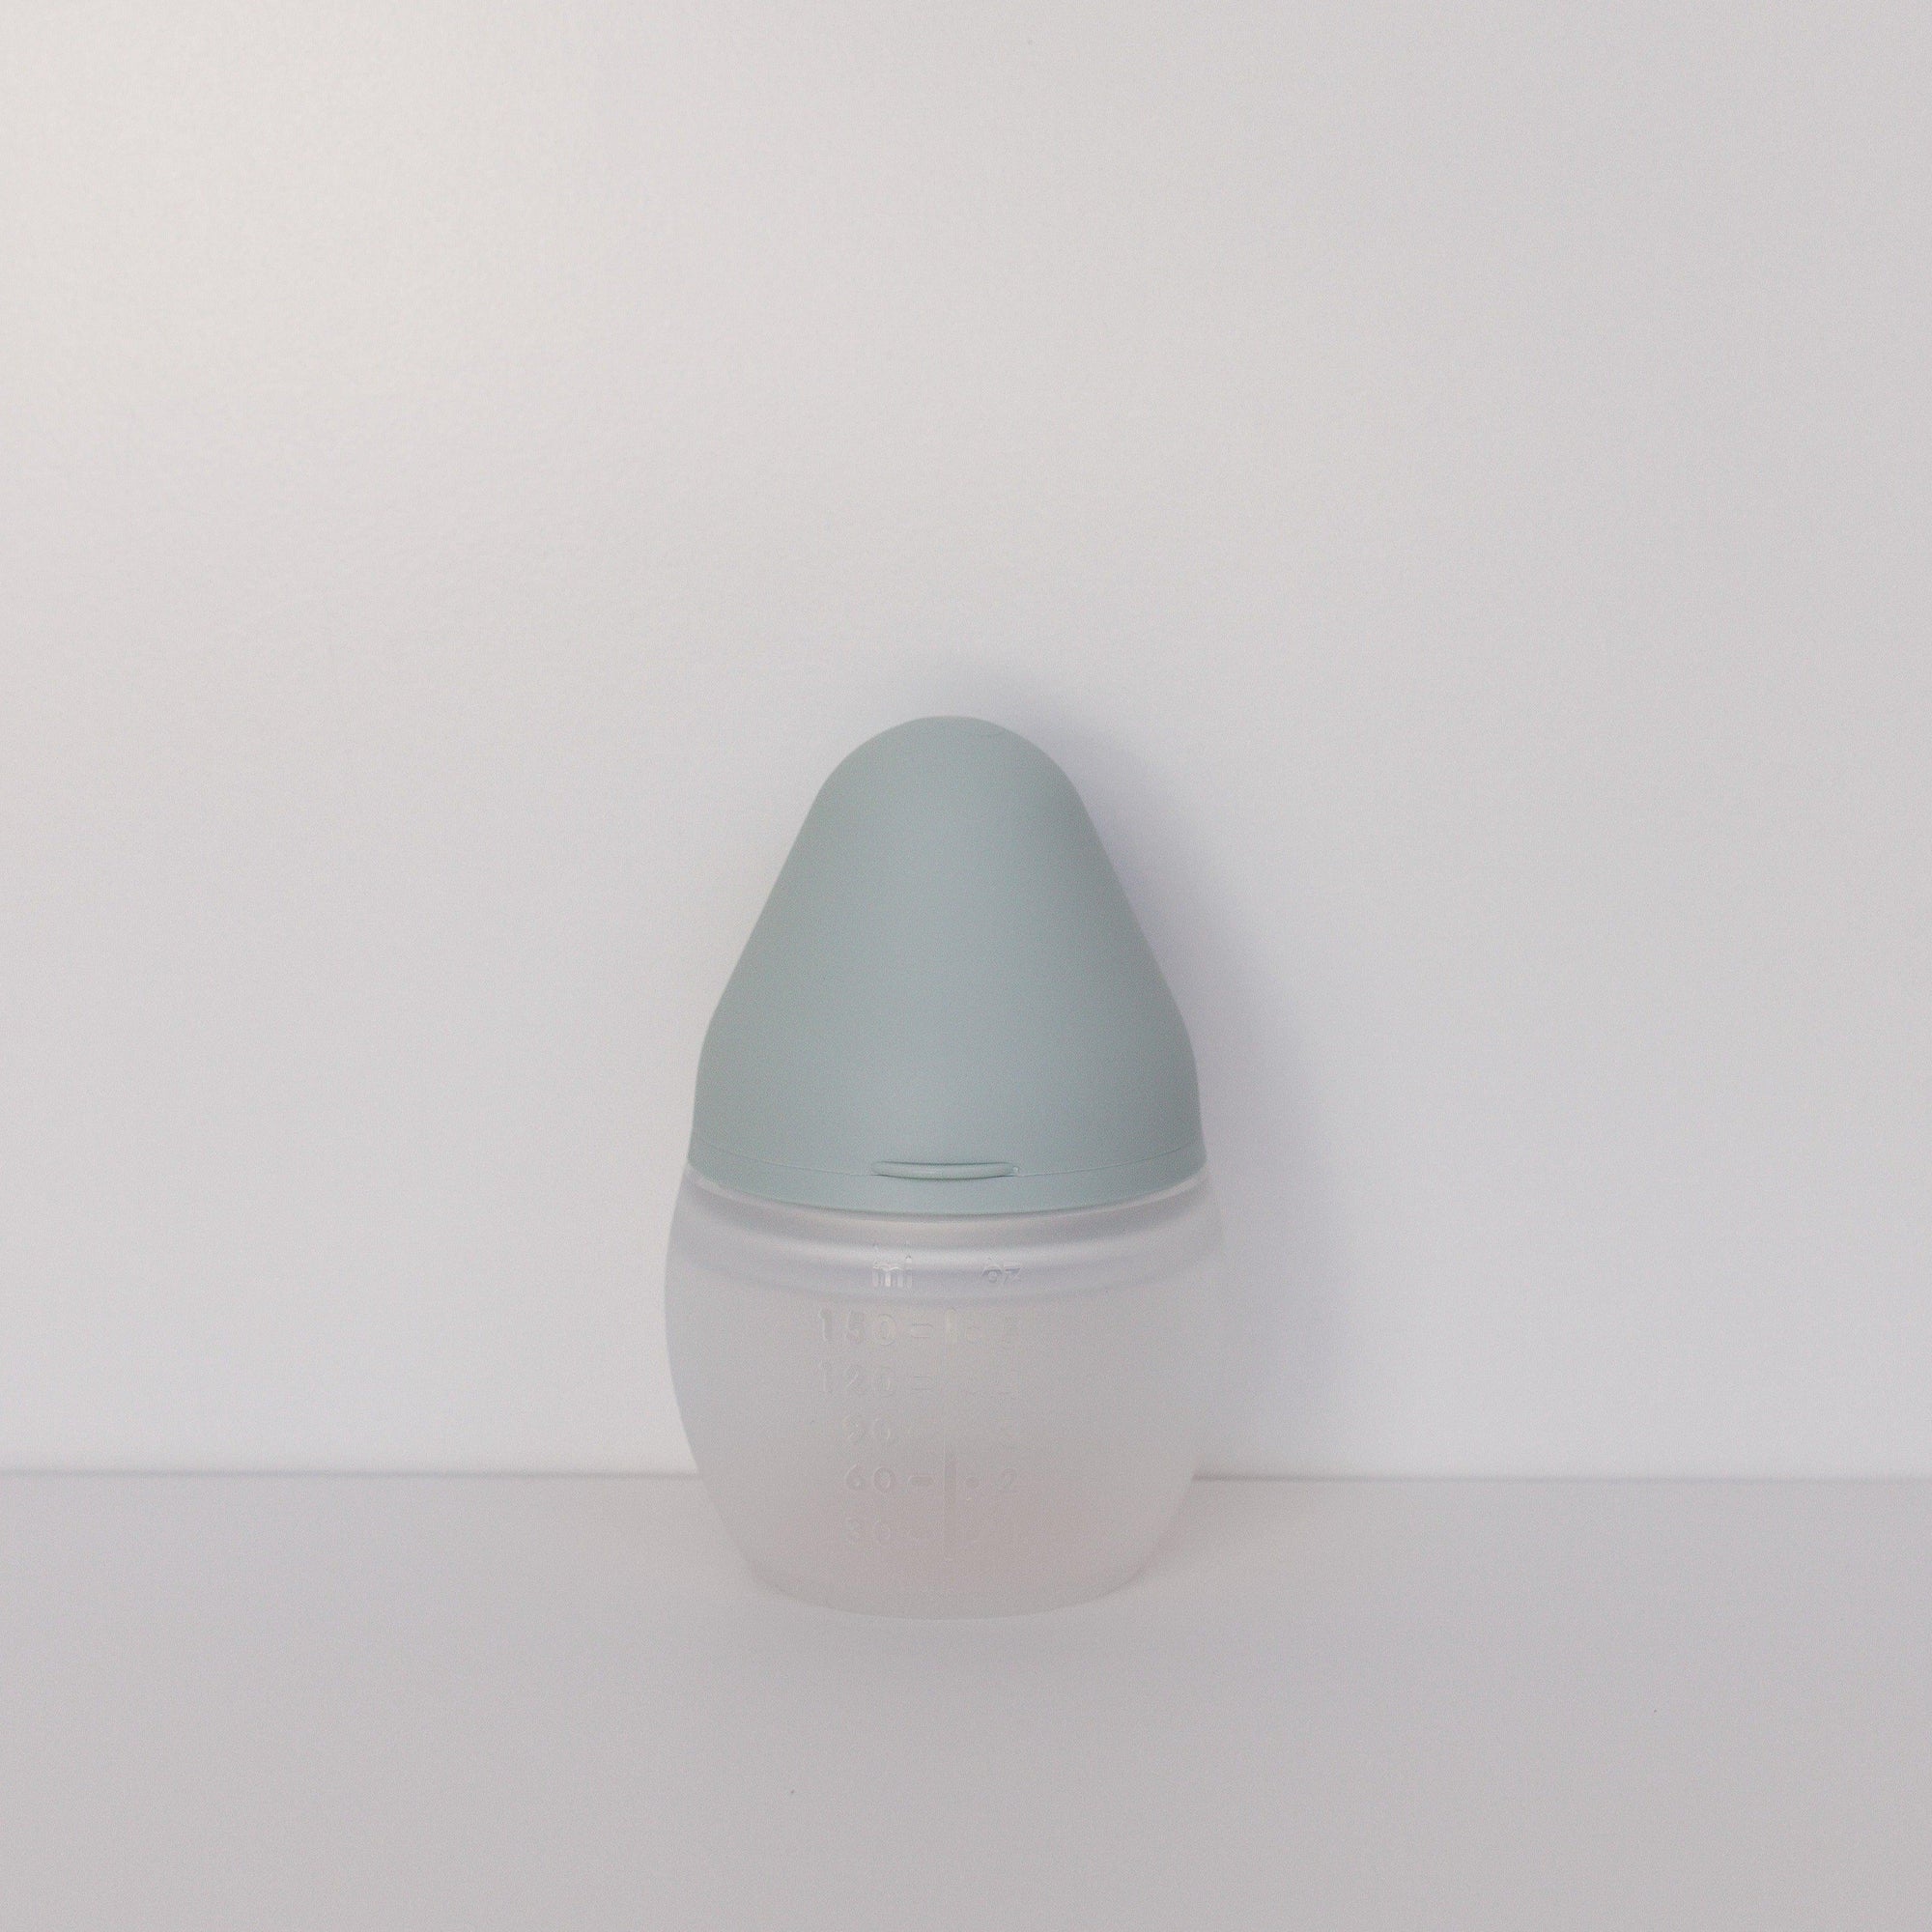 An Elhée France BibRond ivy green baby bottle sitting on a white surface.